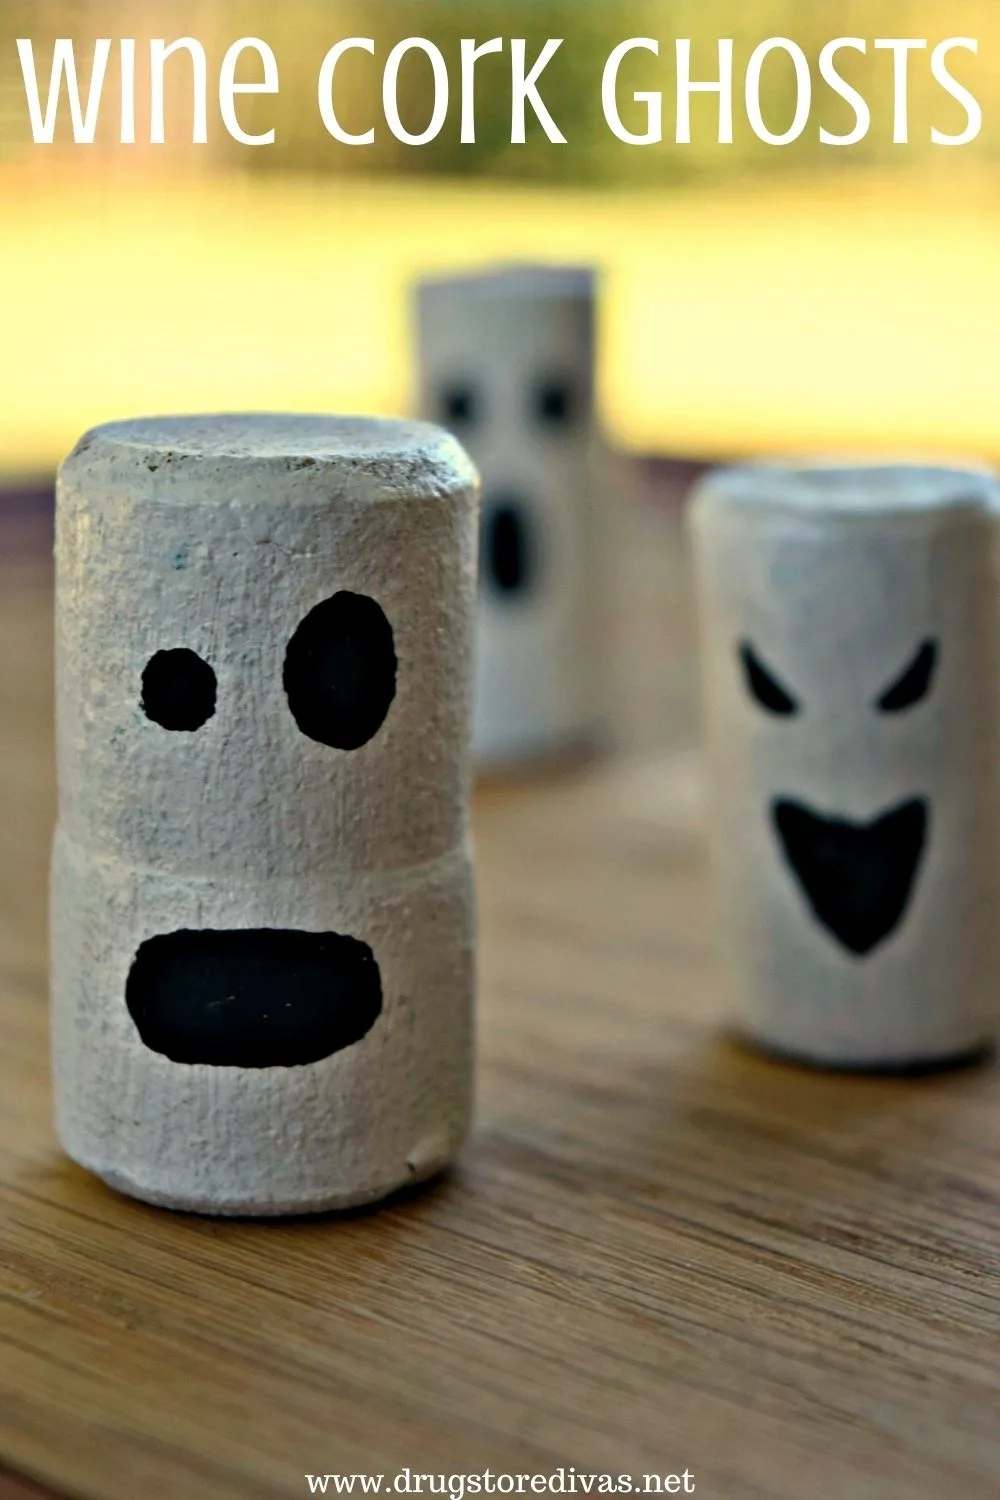 Three wine corks painted to look like ghosts with the words "Wine Cork Ghosts" digitally written on top.